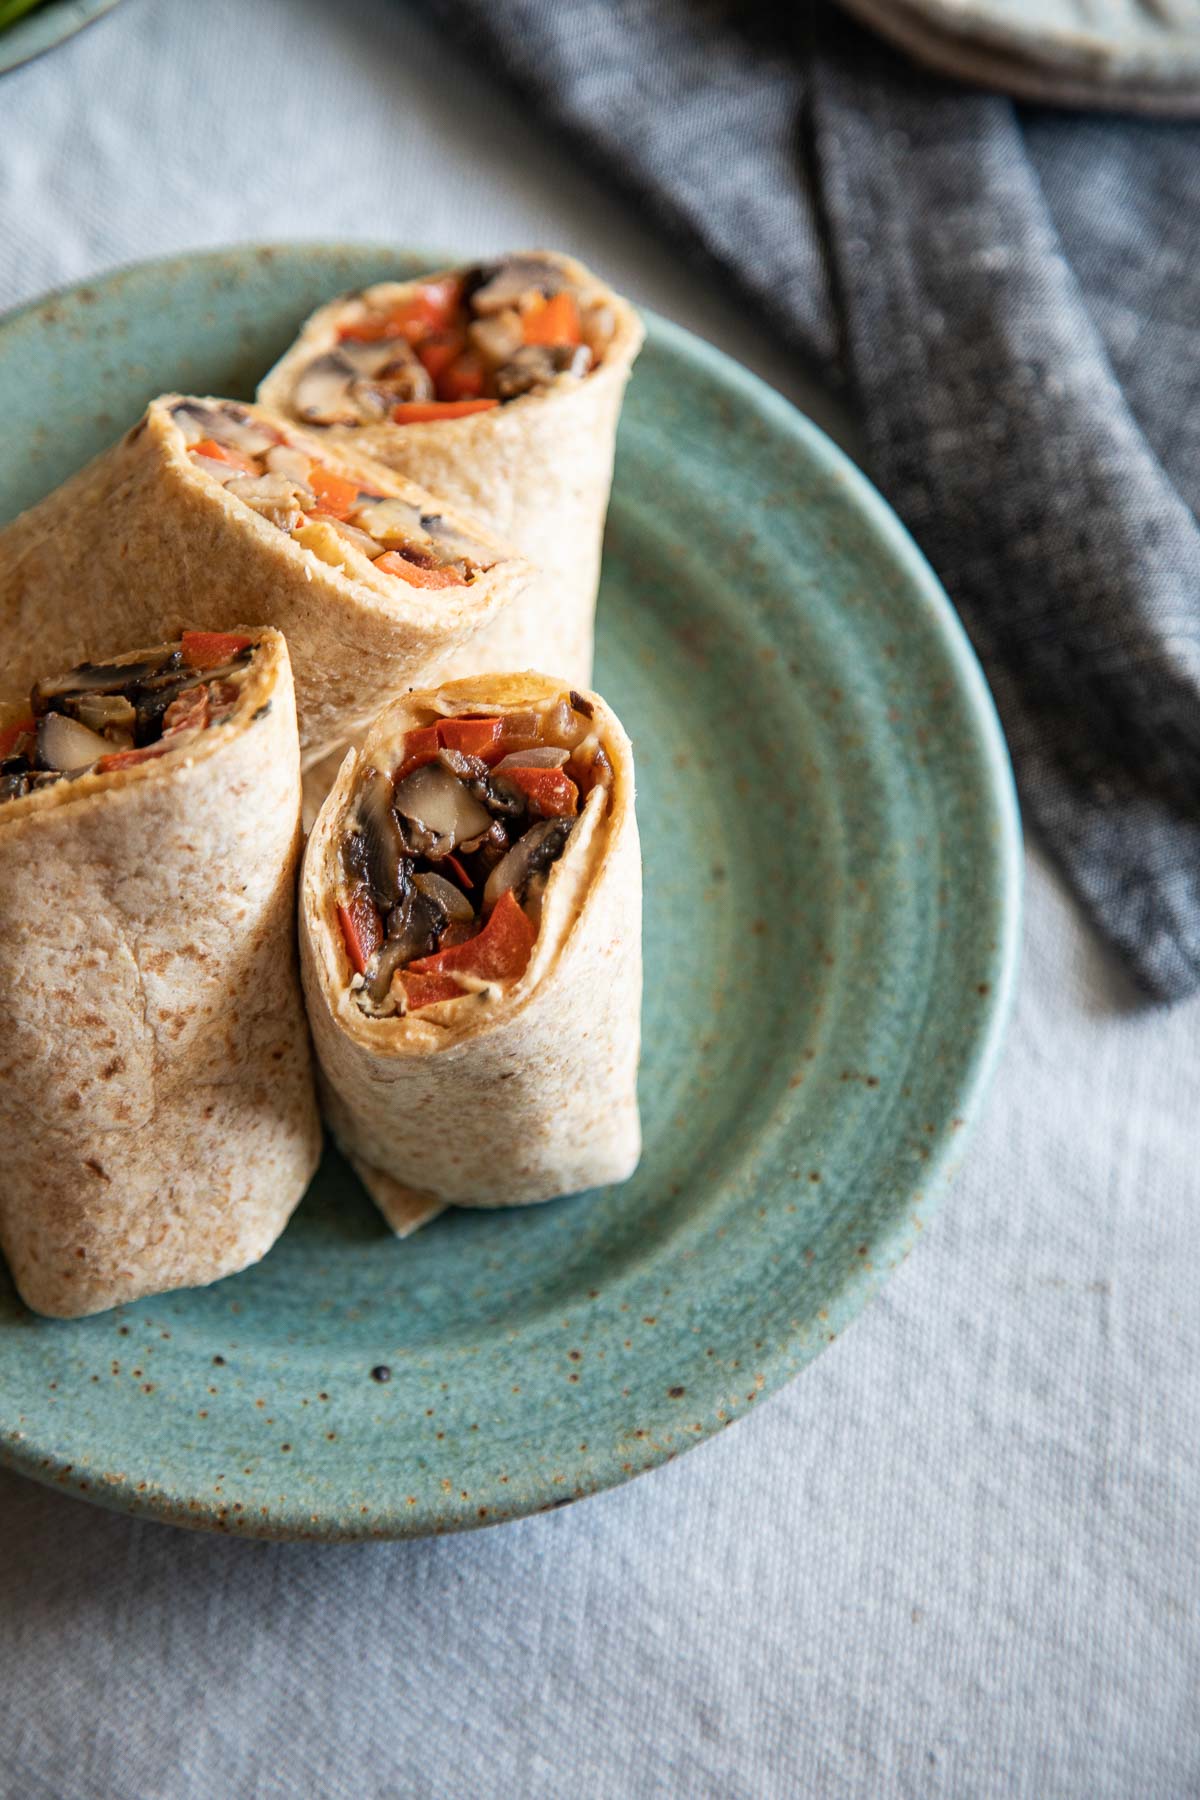 Vegan Wrap with Hummus and Roasted Vegetables